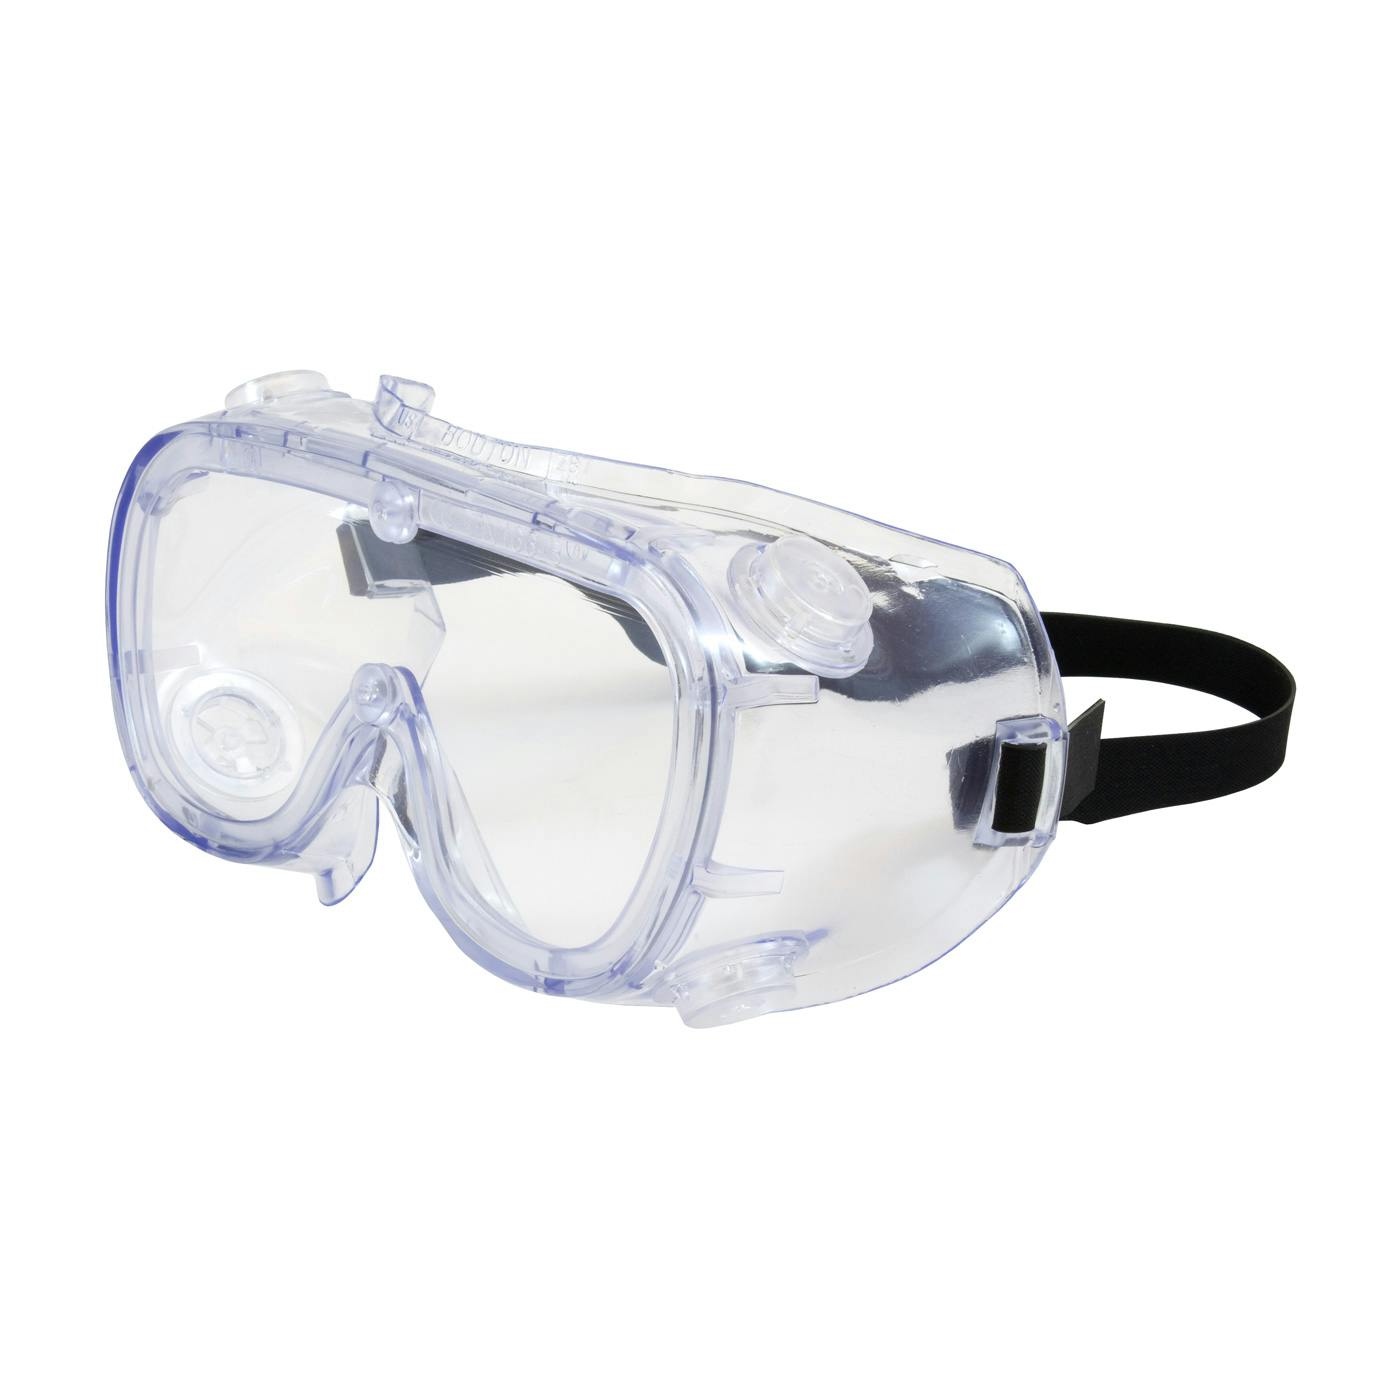 Indirect Vent Goggle with Clear Blue Body, Clear Lens and Anti-Scratch / Anti-Fog Coating, Clear (248-5190-400B) - OS